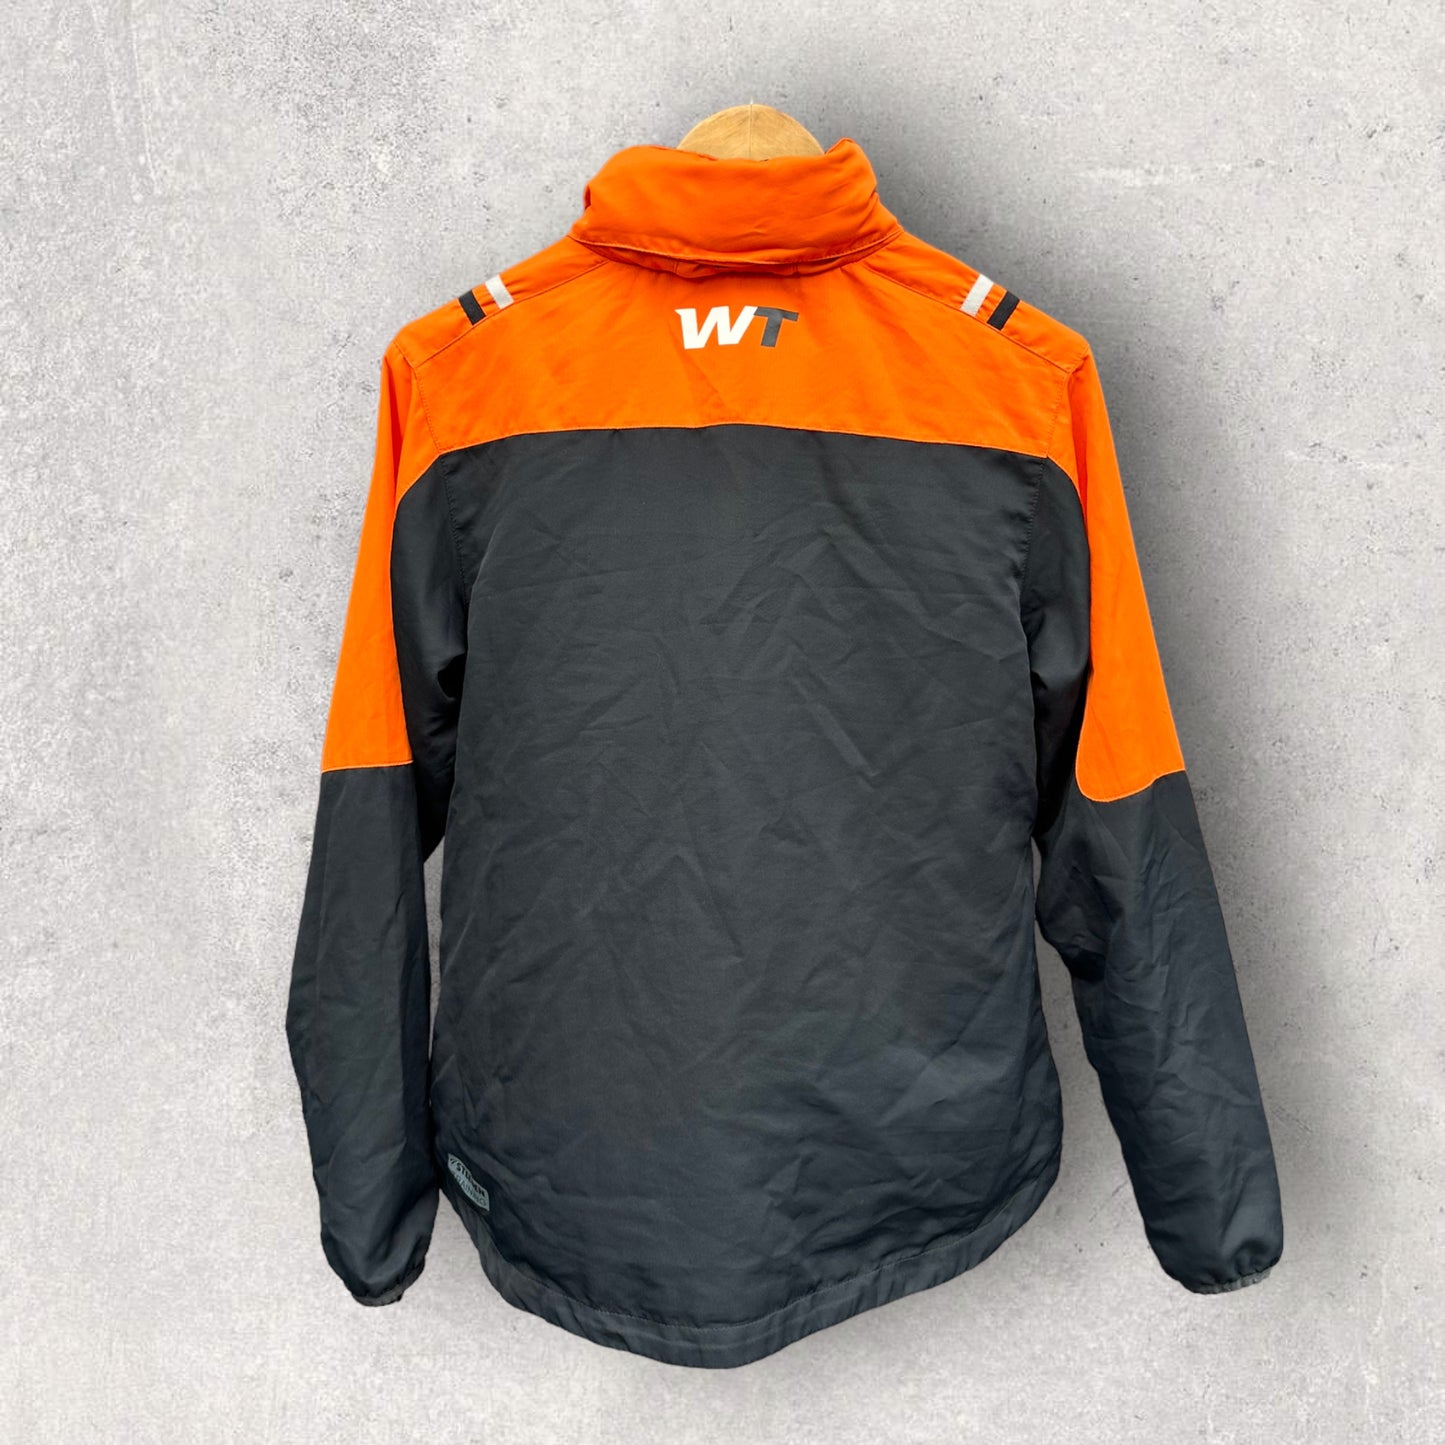 WESTS TIGERS NRLW PLAYER ISSUED TRACK JACKET